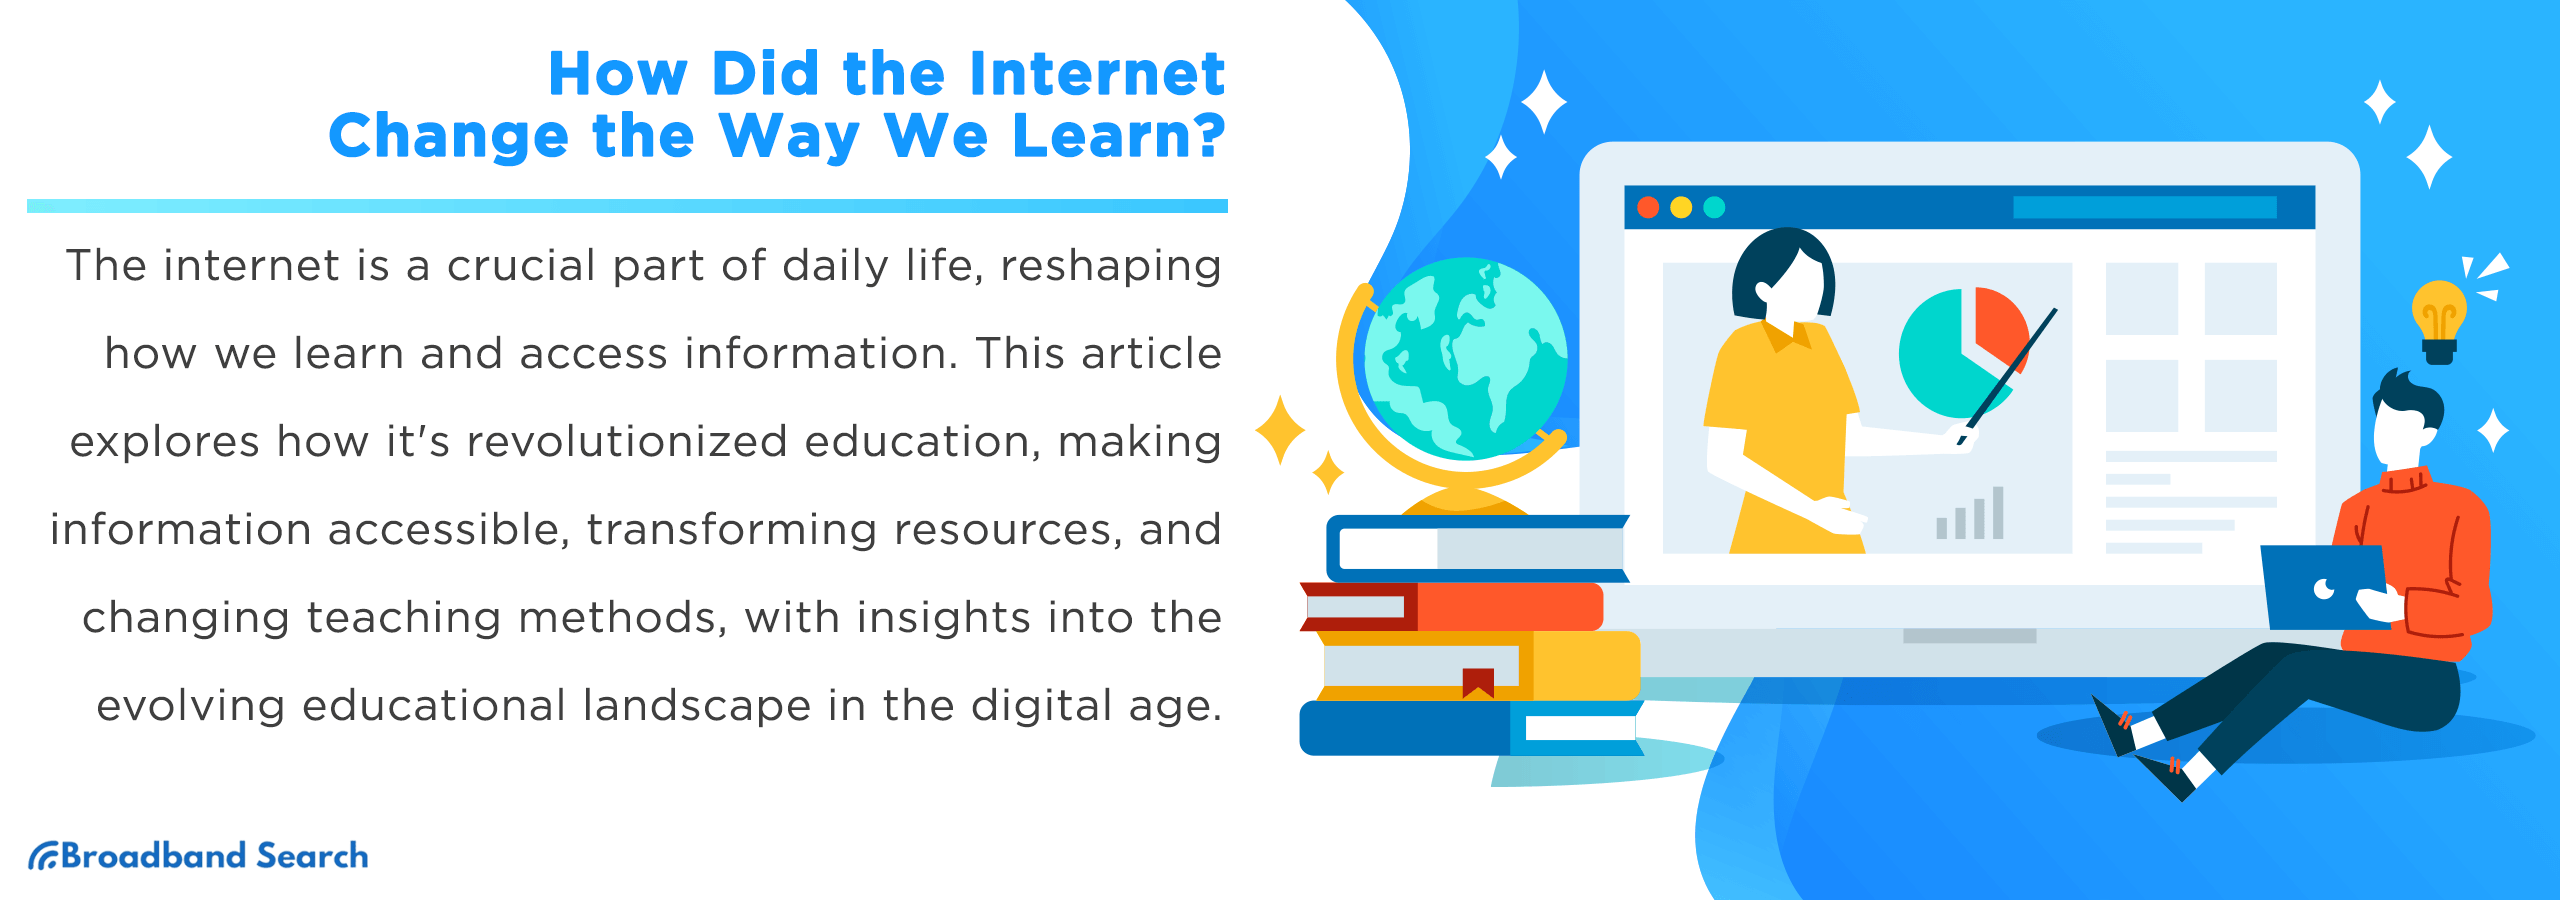 How Did the Internet Change the Way We Learn?